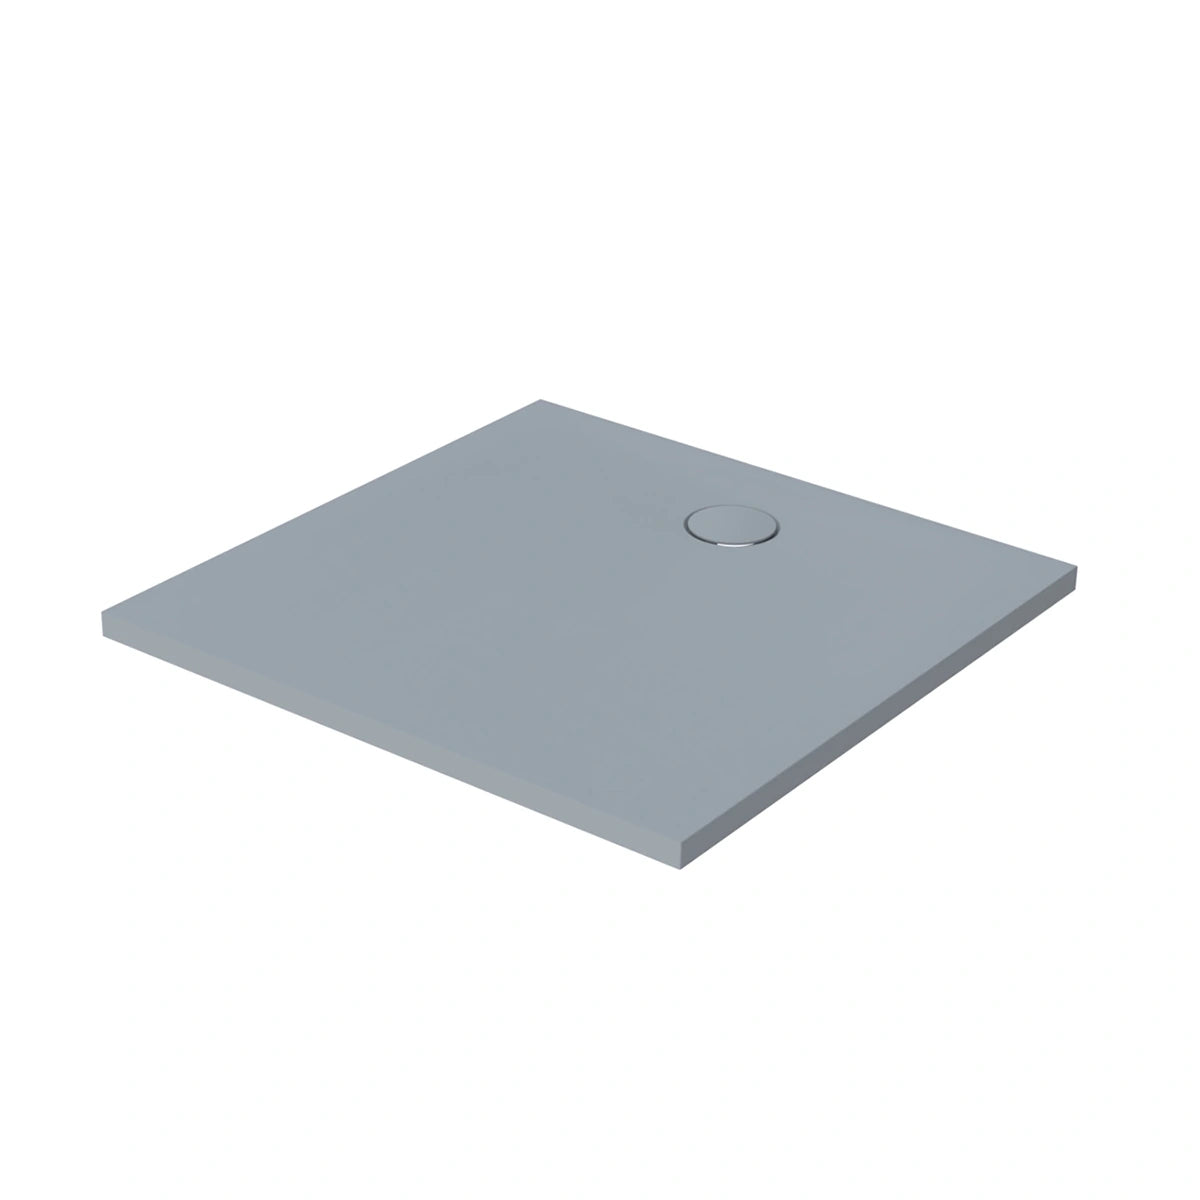 Shower base - 35.43 in.  x 35.43 in. - gray structure